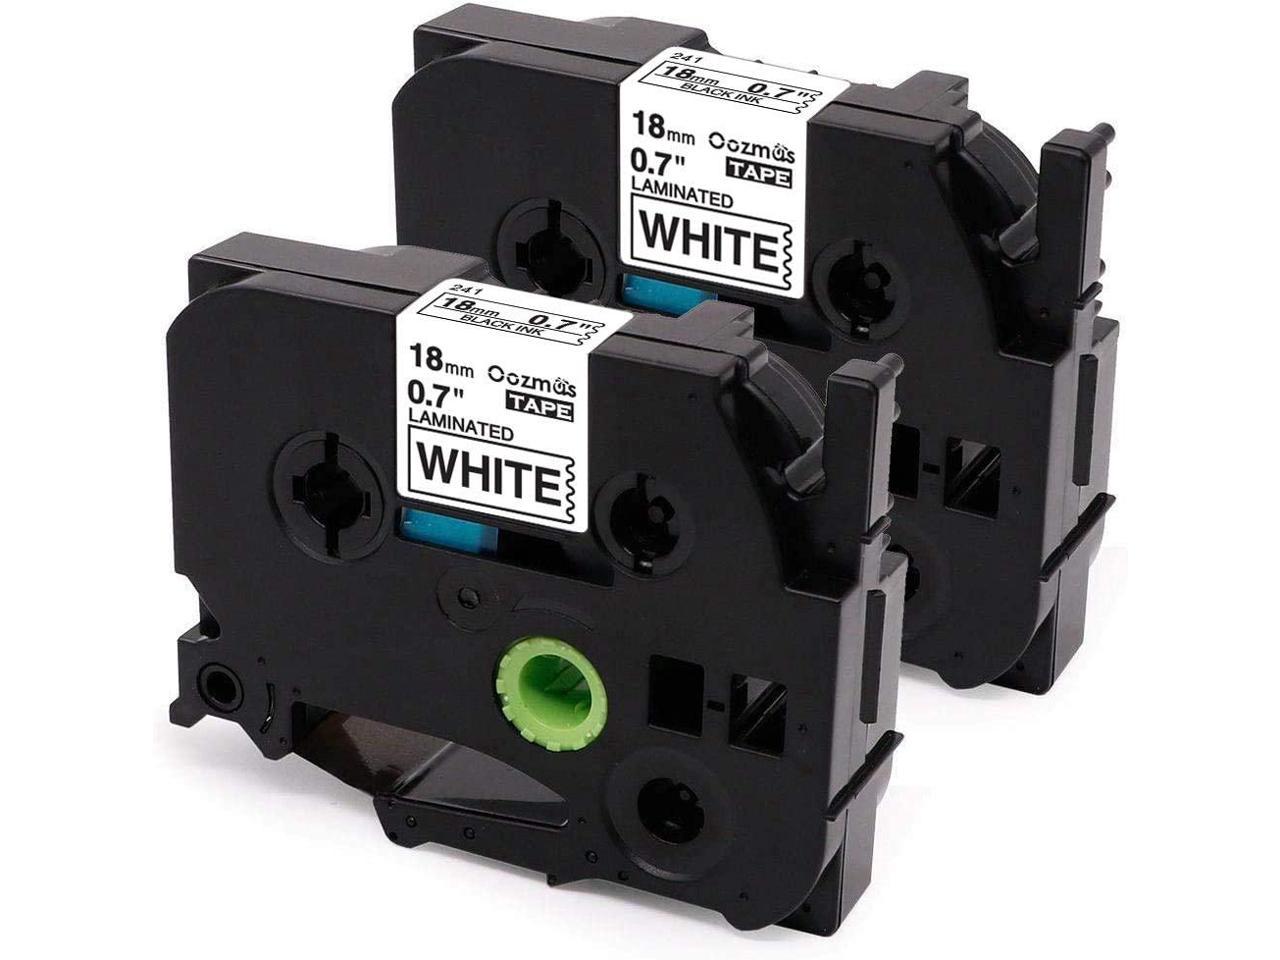 TZe241 TZ241 Black on White P-Touch Label Tape Compatible for Brother 18mm 3pk 